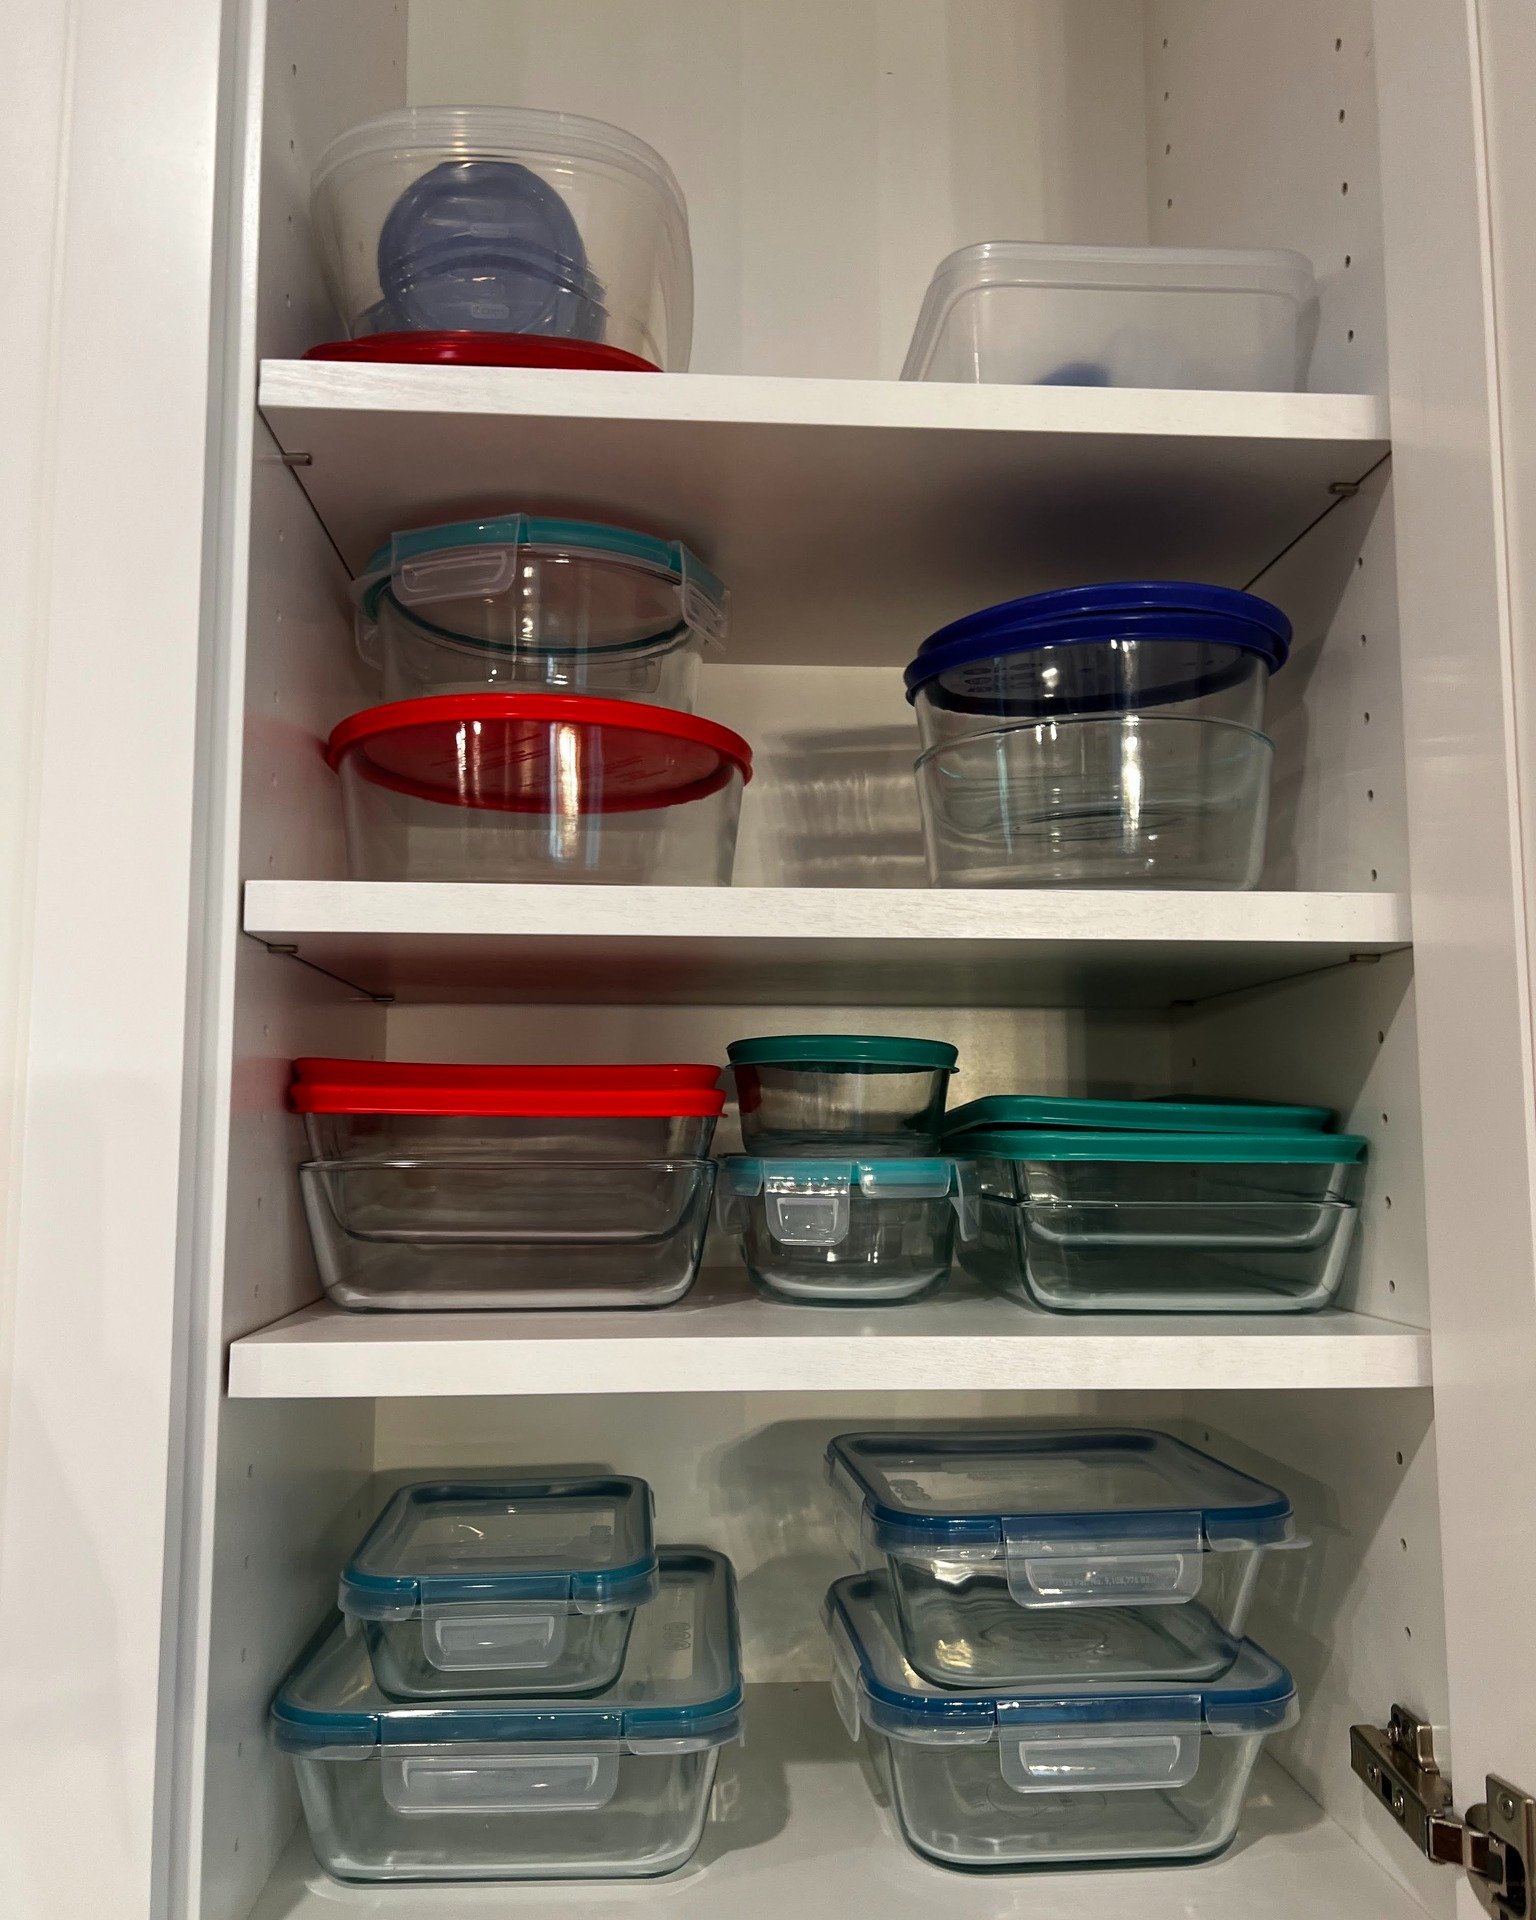 Is there anything more annoying than when you can't find the lid that fits on your Tupperware!?

Try these helpful tips when storing your food storage containers:

👉 Sort by Size: Keep lids and containers together by grouping them according to size.